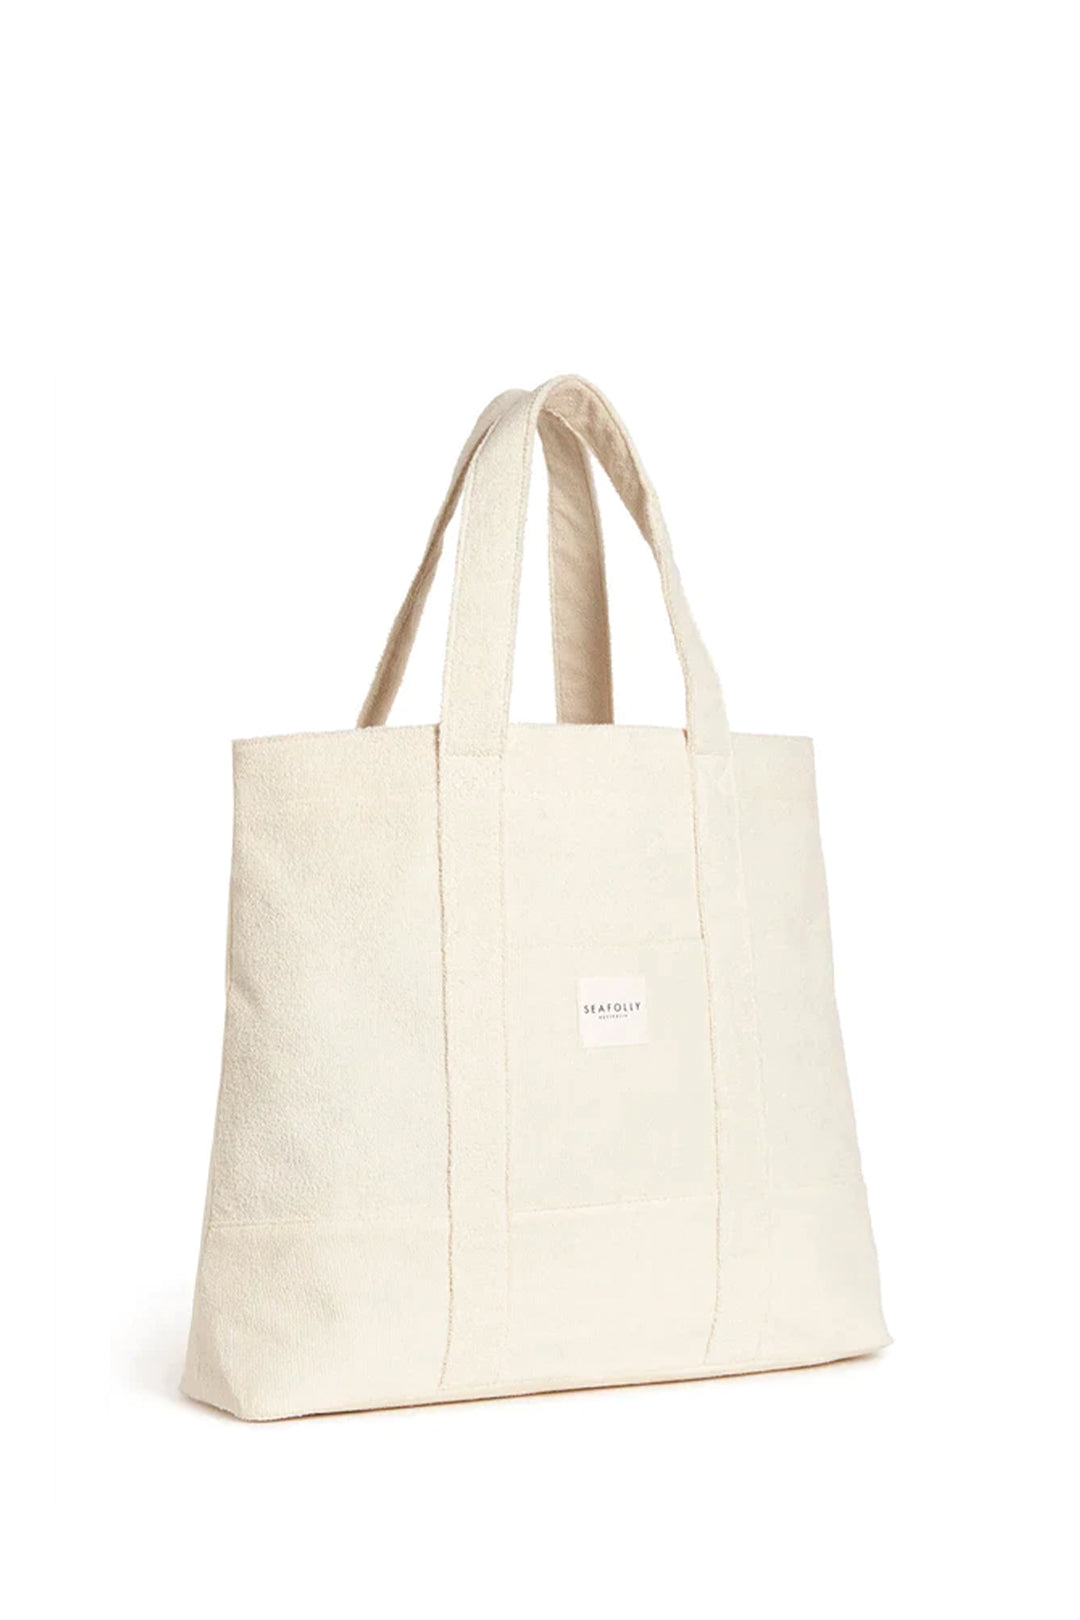 Seafolly Bag in Sand color